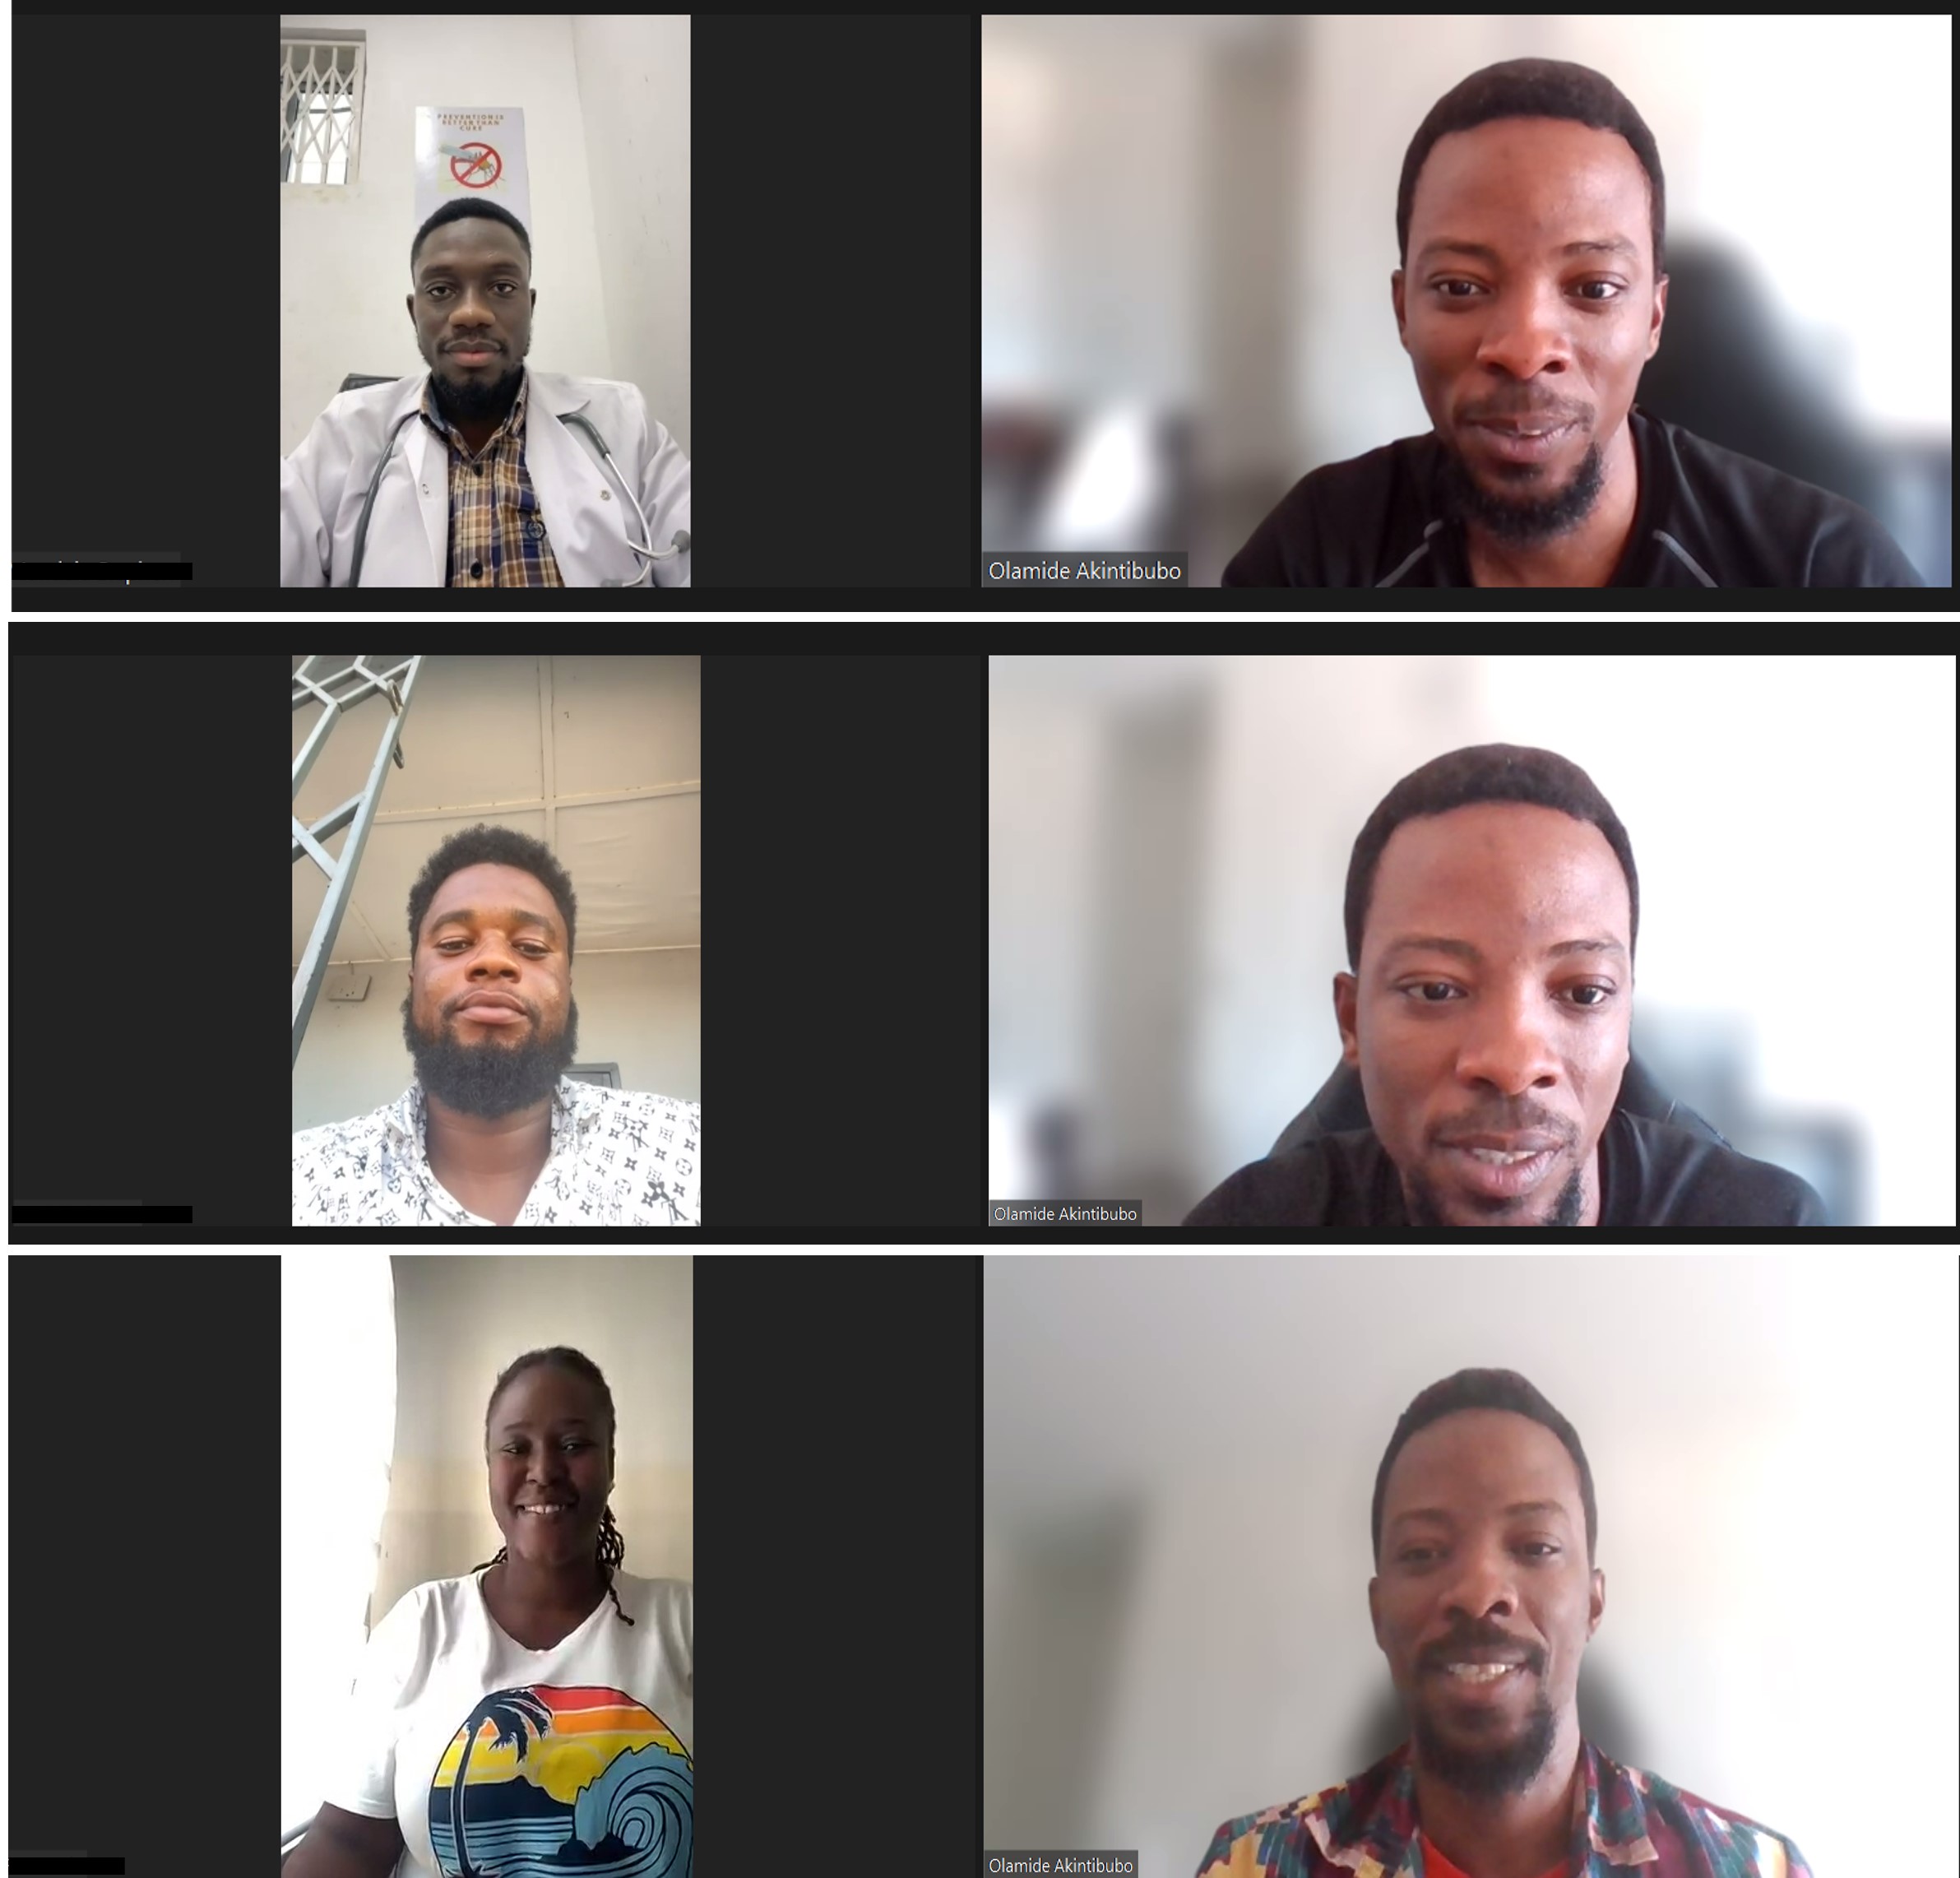 Pictures of 3 Zoom calls. Each has a research participant on the left and Olamide on the right. 